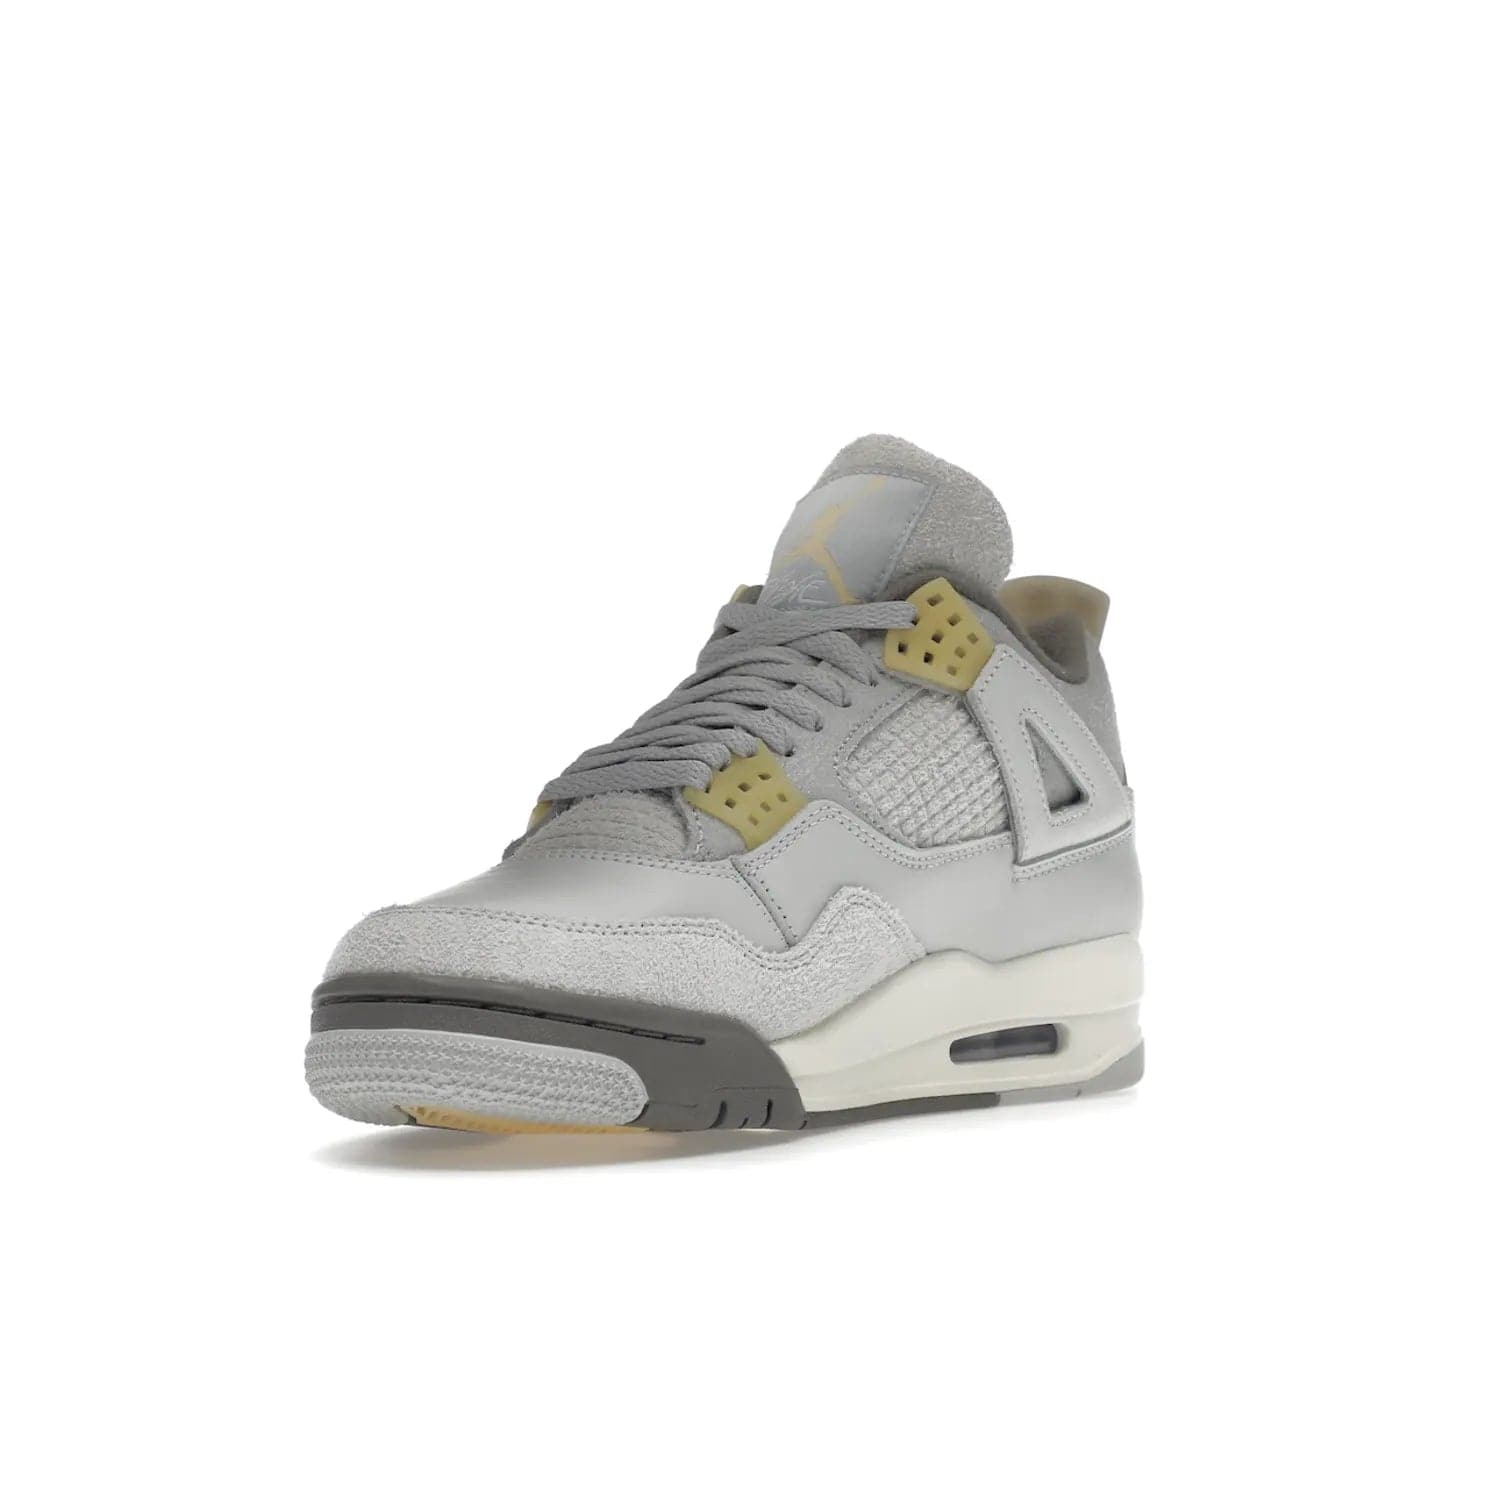 Jordan 4 Retro SE Craft Photon Dust - Image 14 - Only at www.BallersClubKickz.com - Upgrade your shoe collection with the Air Jordan 4 Retro SE Craft Photon Dust. This luxurious sneaker features a combination of suede and leather with unique grey tones like Photon Dust, Pale Vanilla, Off White, Grey Fog, Flat Pewter, and Sail. Available February 11, 2023.